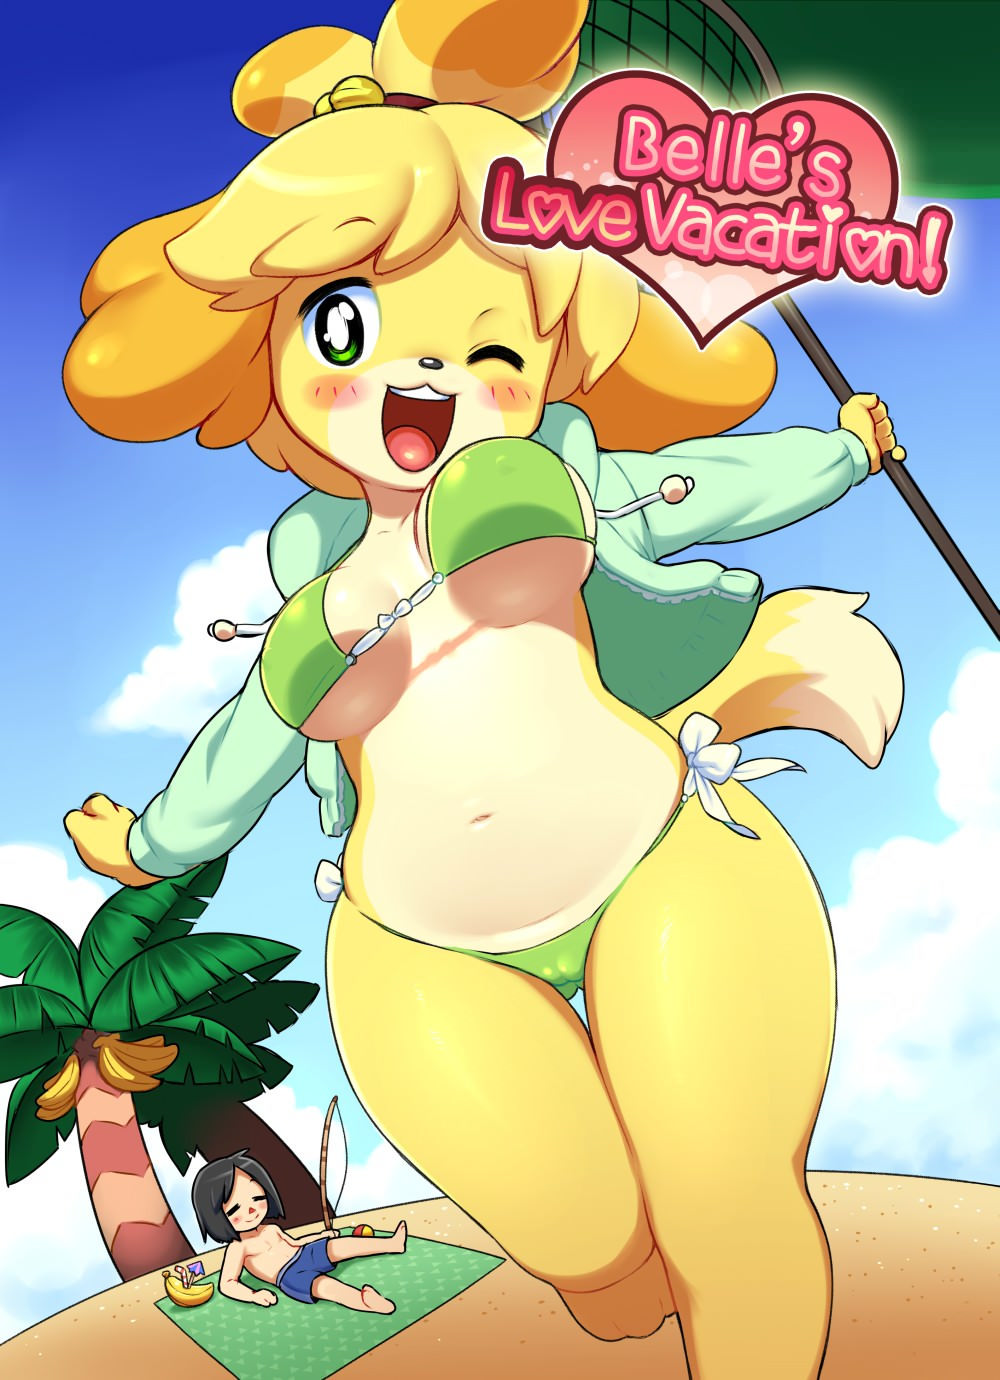 Belle's love vacation